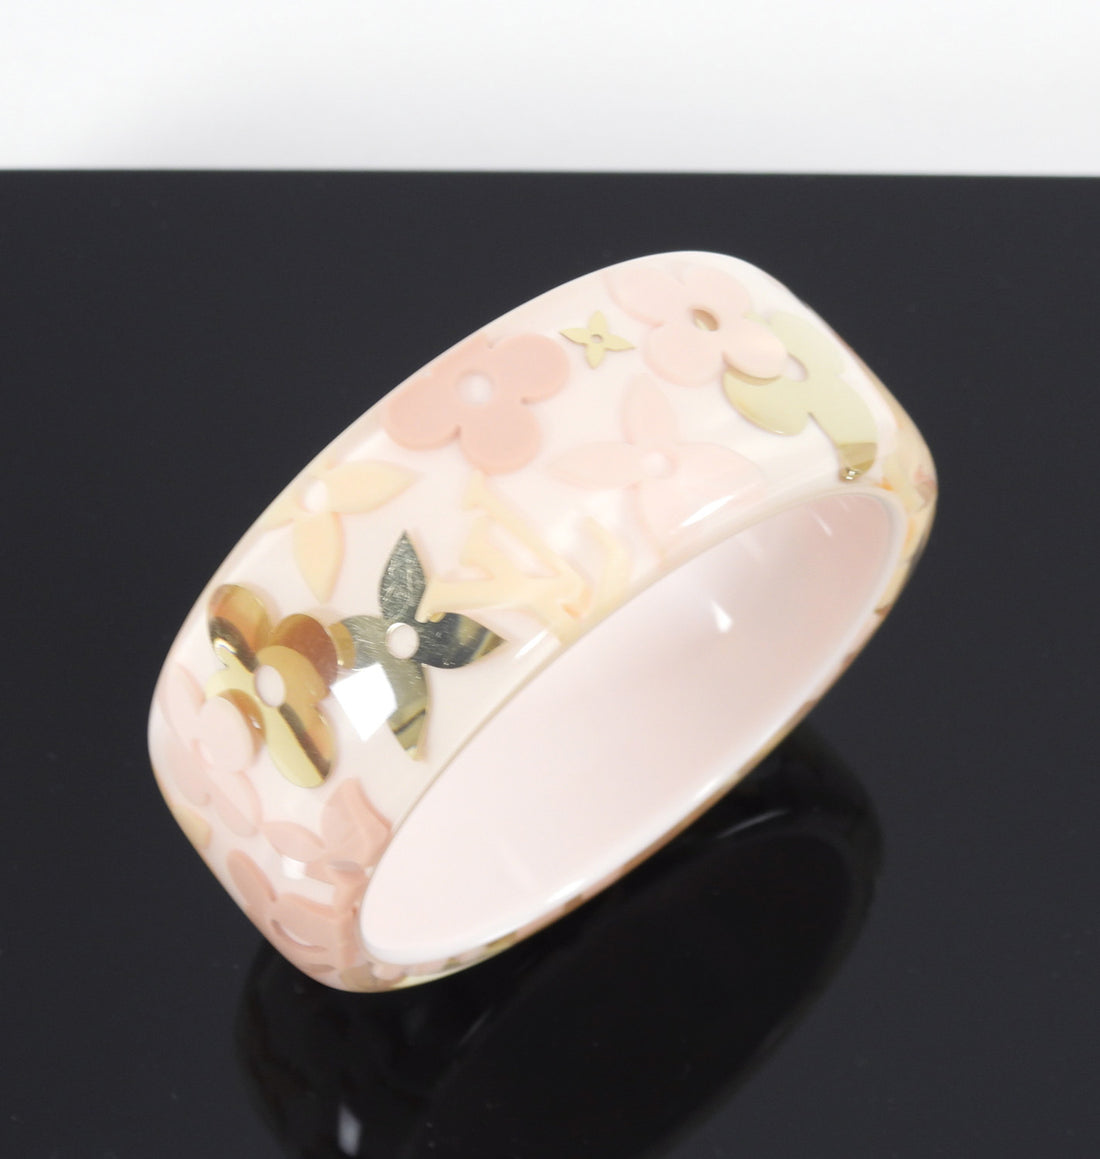 Louis Vuitton - Authenticated Inclusion Ring - Ceramic Pink for Women, Good Condition